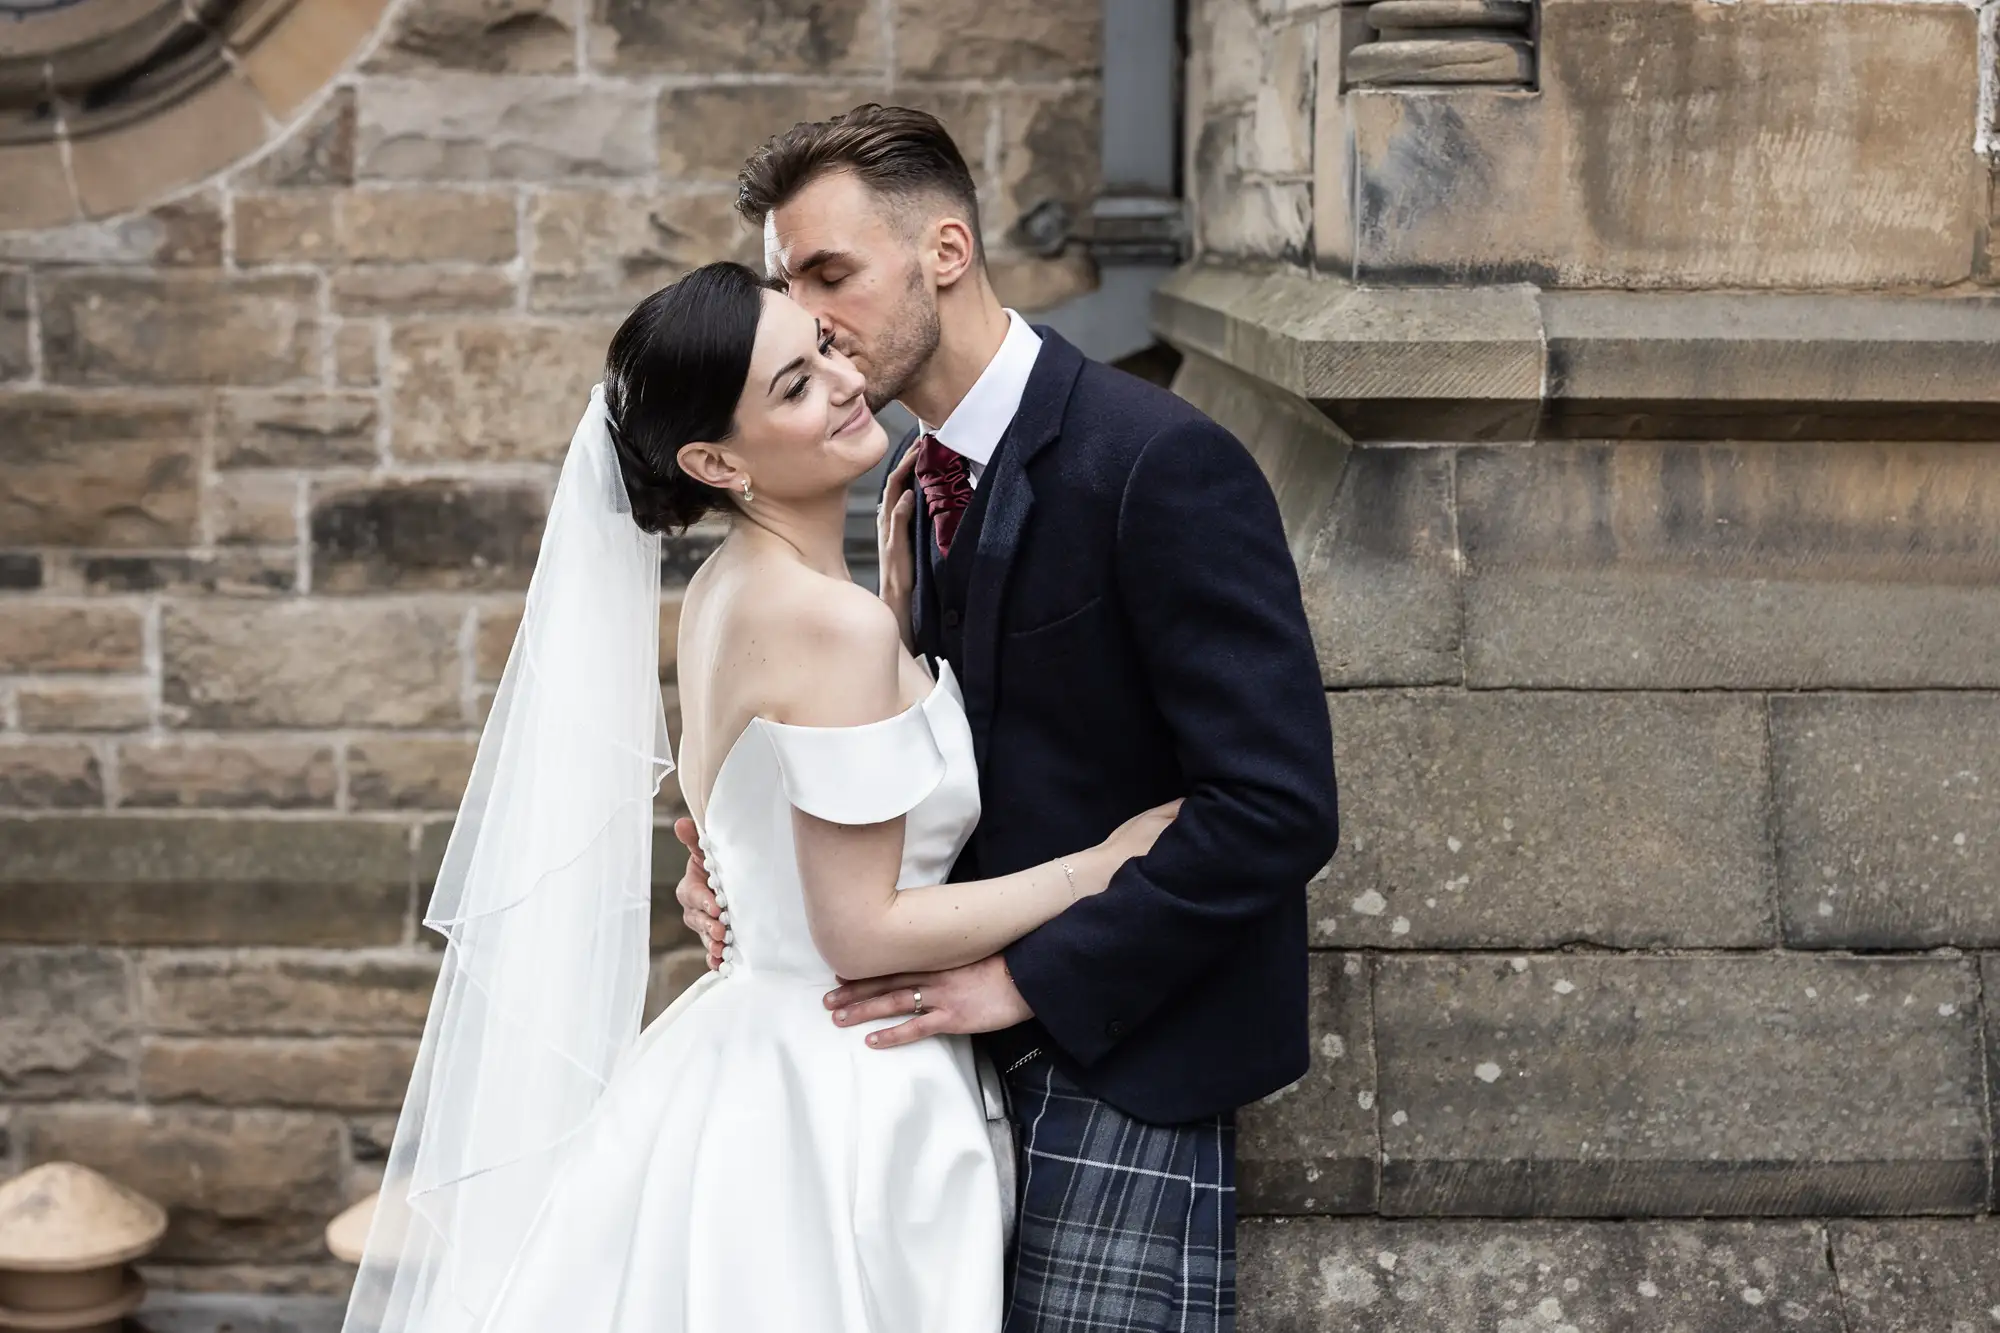 A bride in a white dress and a groom in a kilt embracing and kissing outside a stone building.